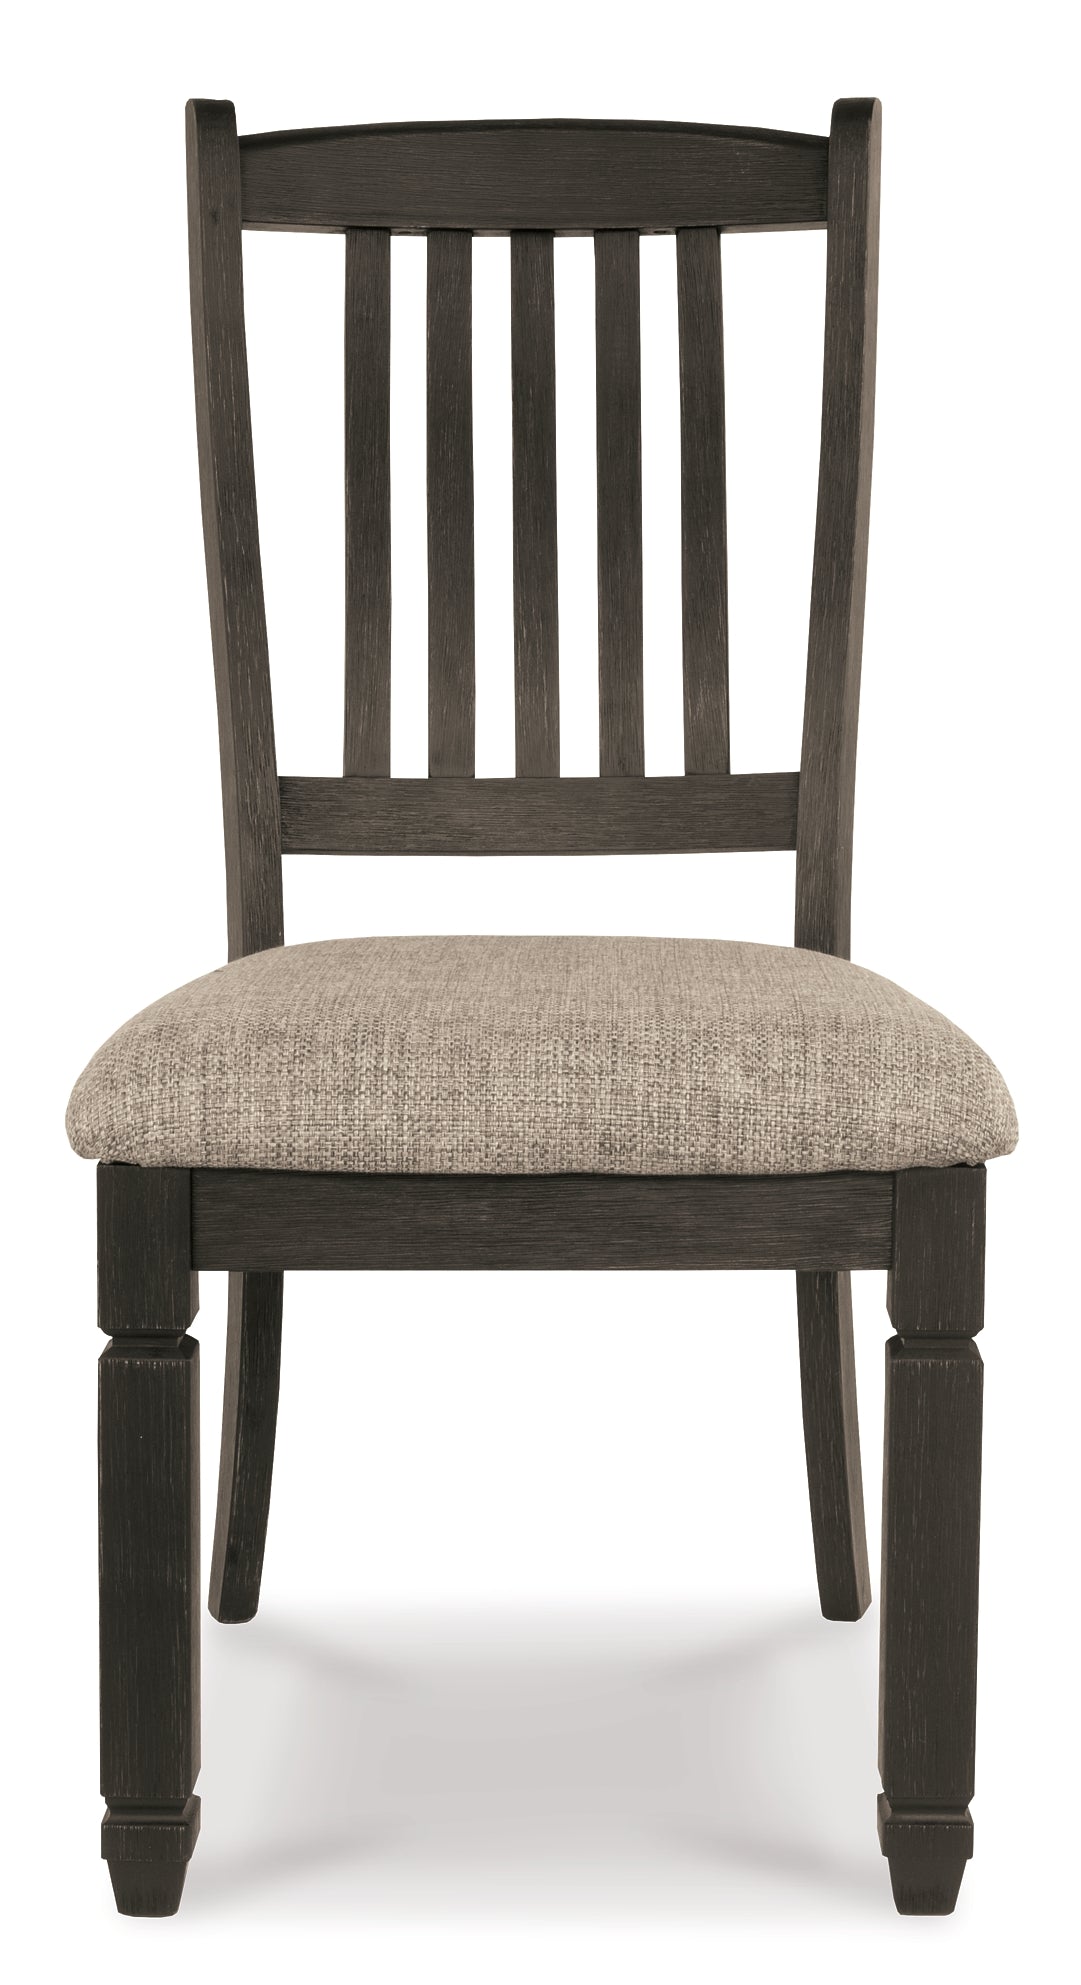 Tyler Creek Dining Table and 6 Chairs JB's Furniture  Home Furniture, Home Decor, Furniture Store